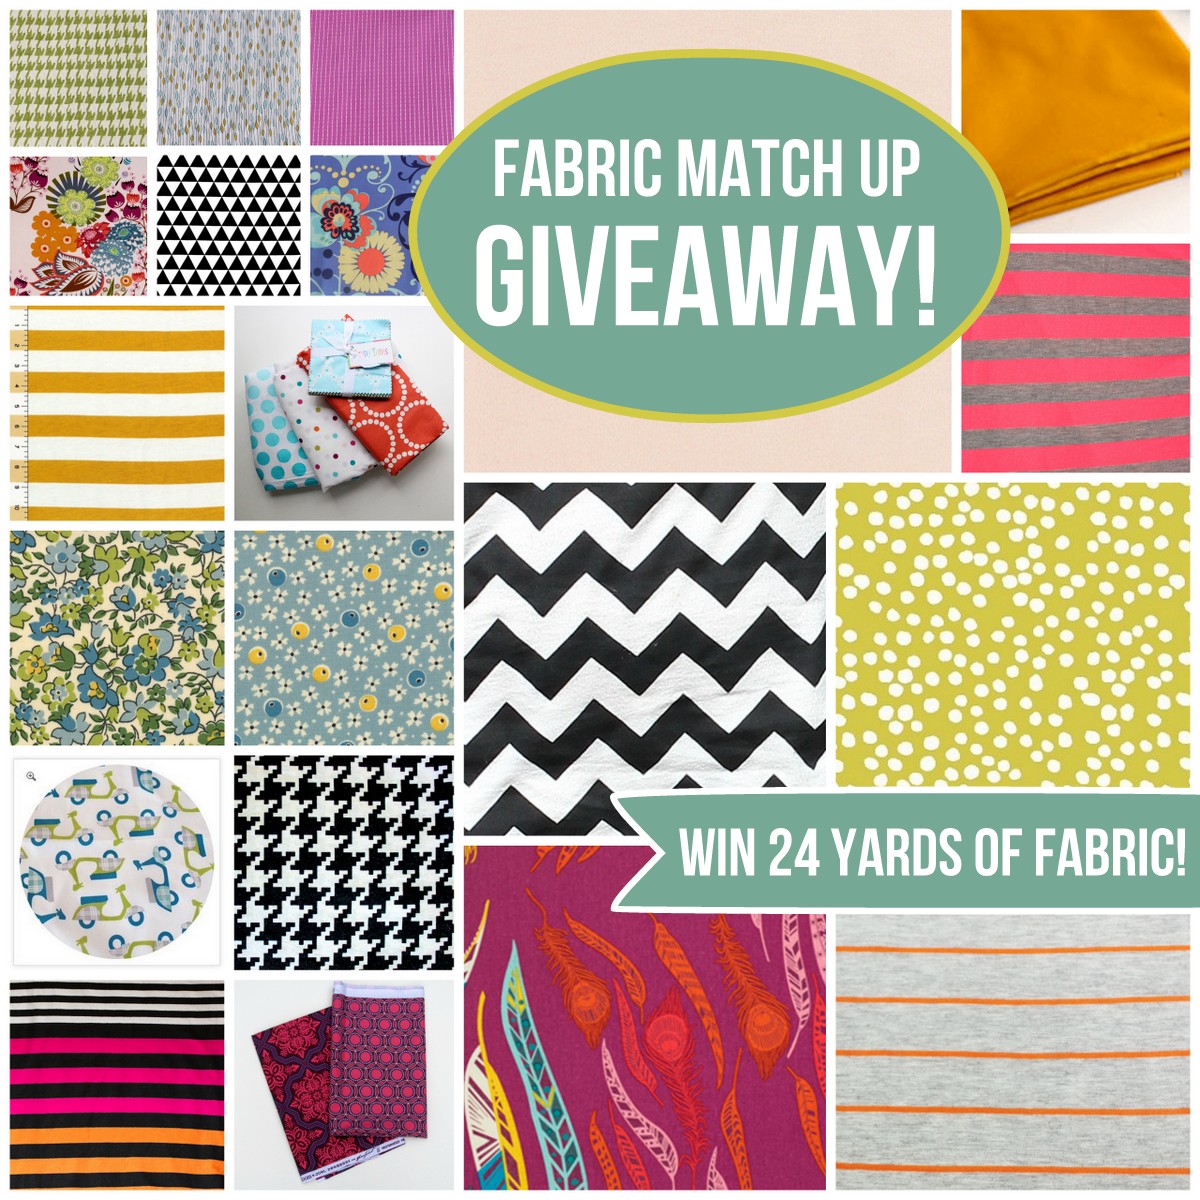 fabric match up giveaway- win 24 yards of fabric from your favorite bloggers!